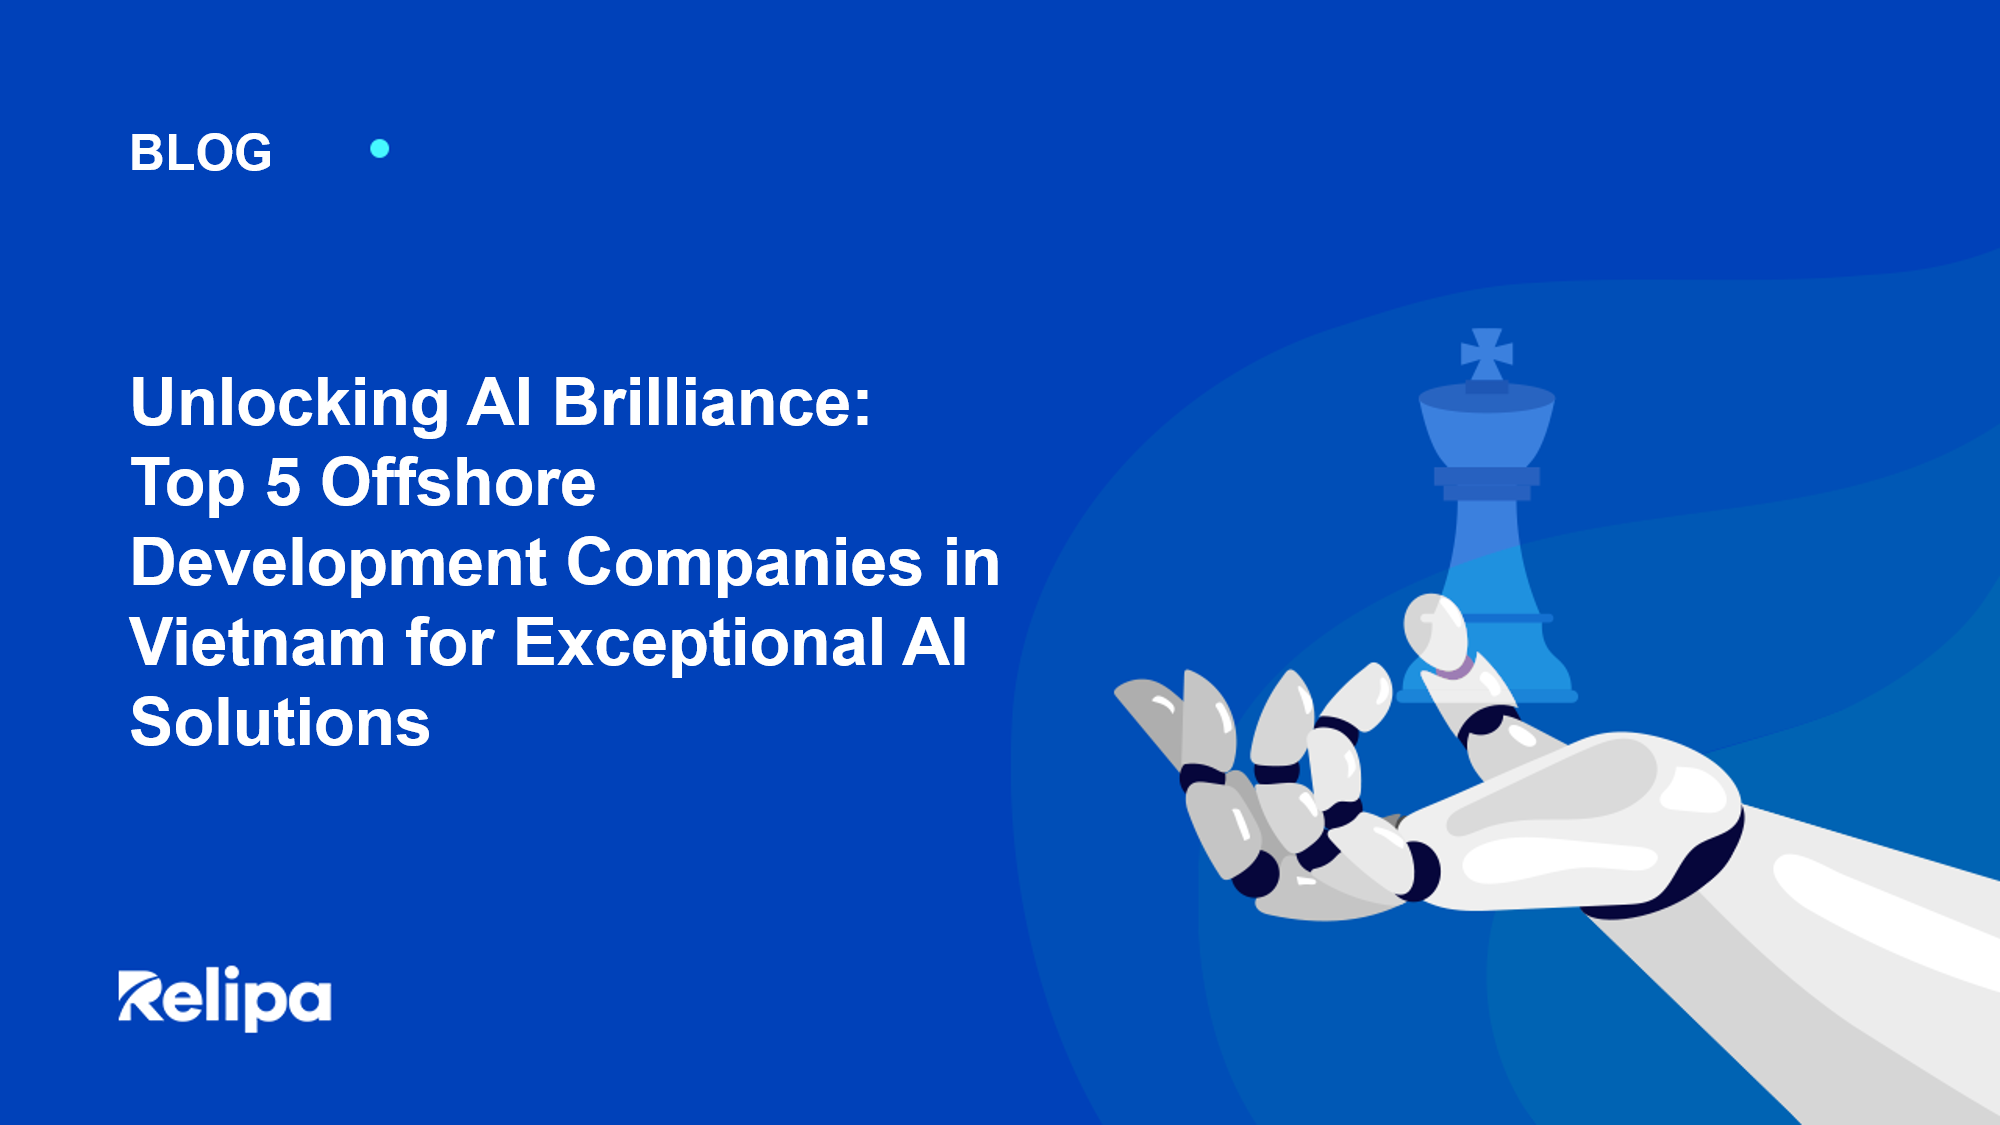 Unlocking AI Brilliance: Top 5 Offshore Development Companies in Vietnam for Exceptional AI Solutions